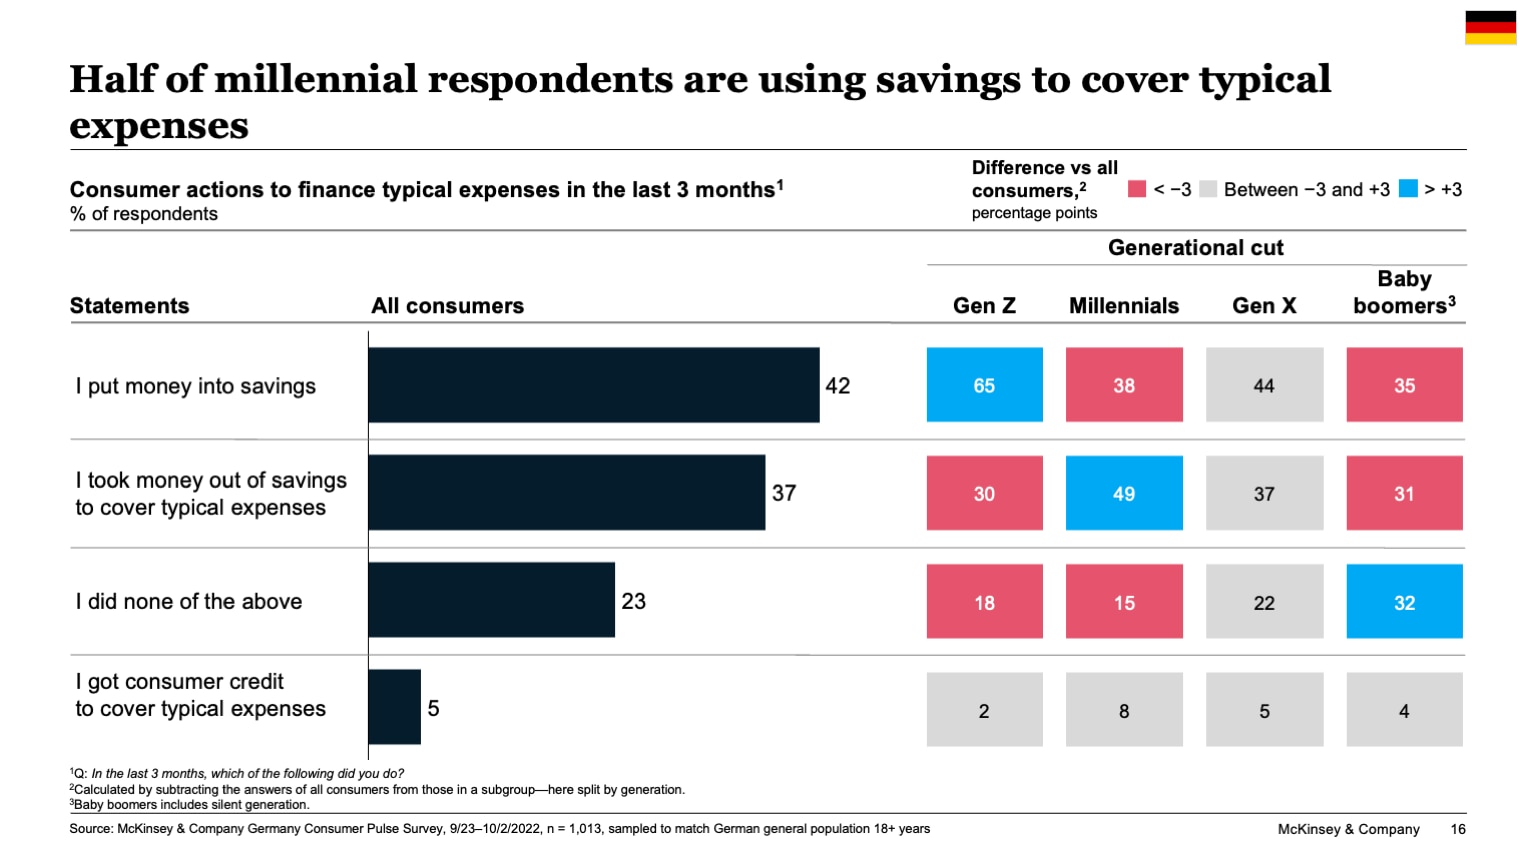 Half of millennial respondents are using savings to cover typical expenses